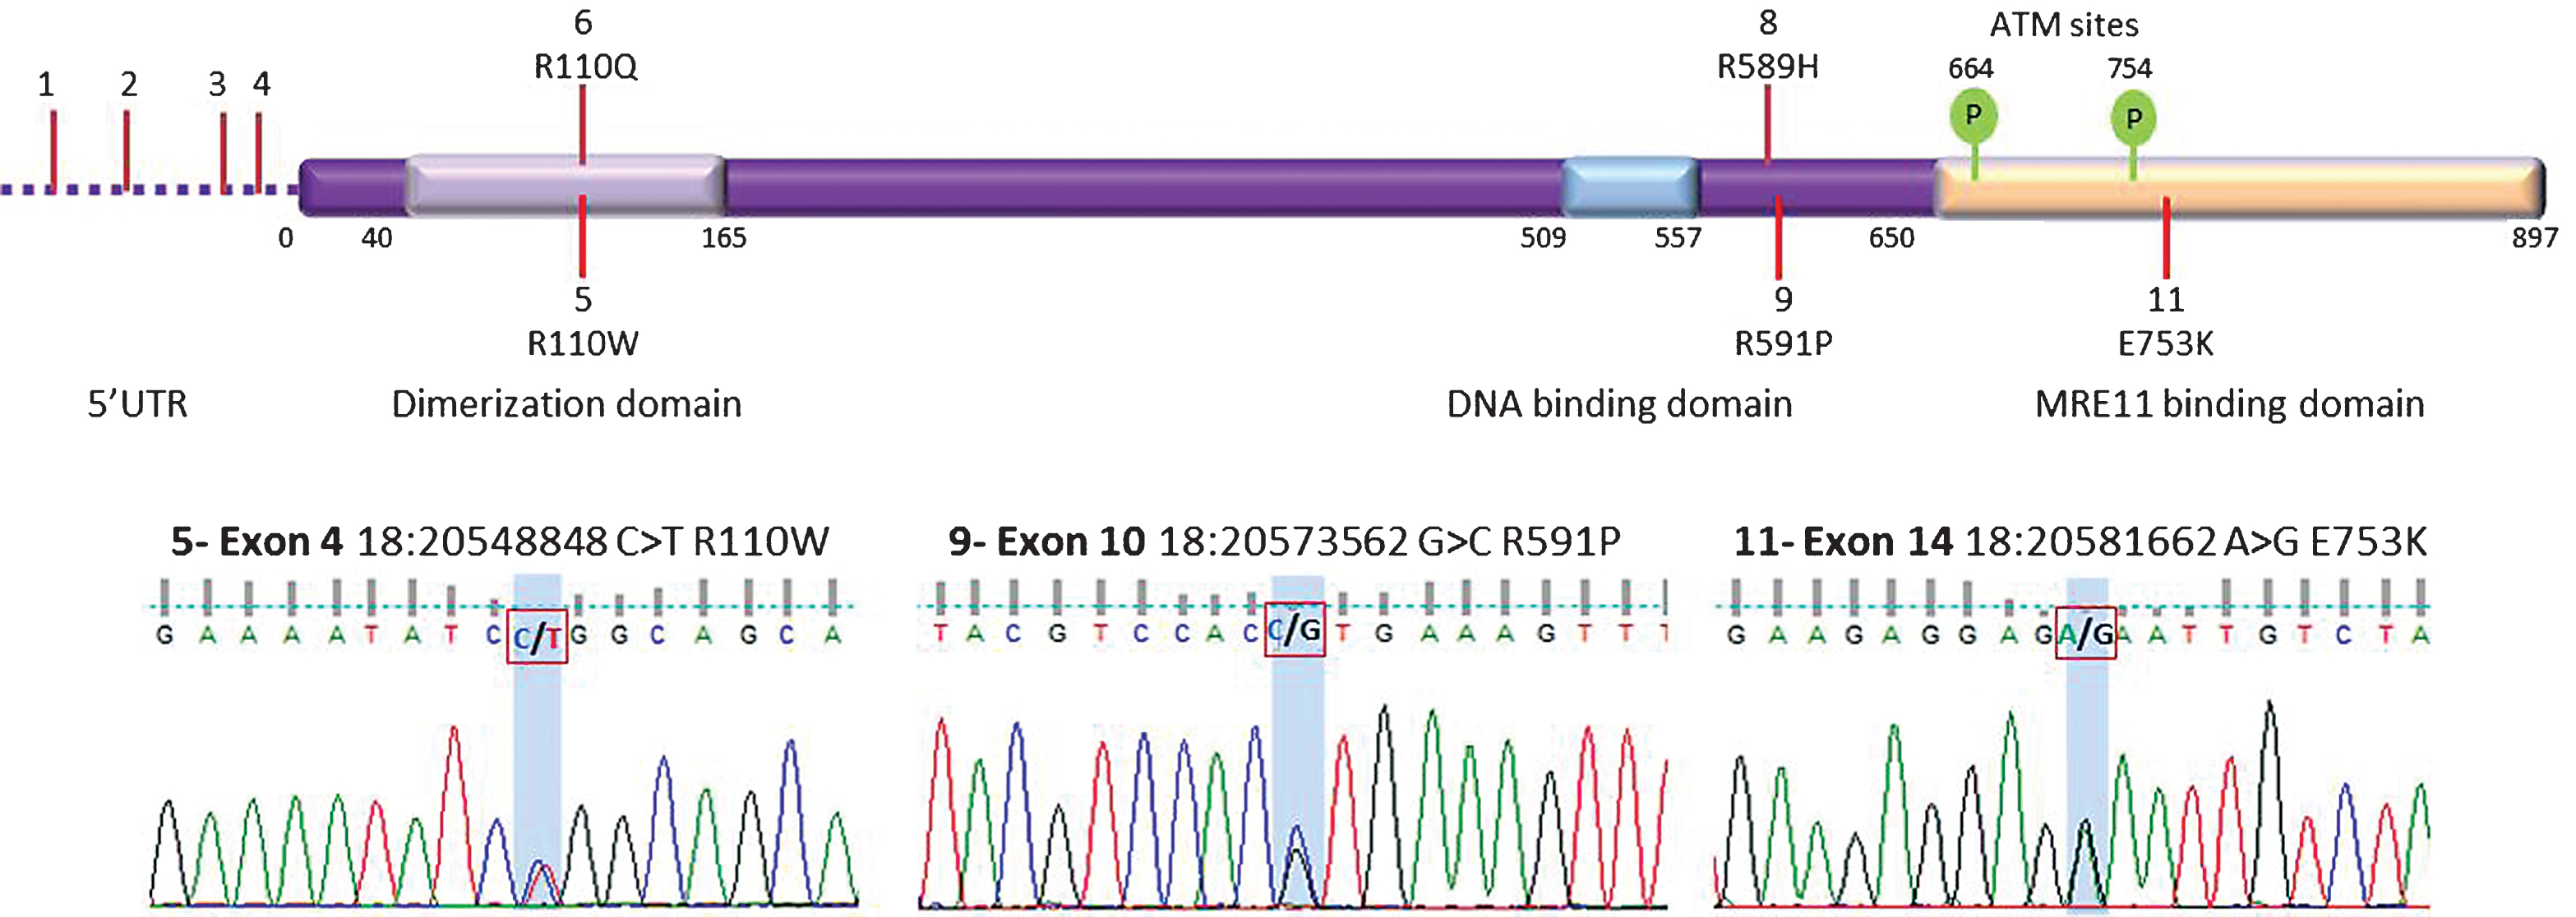 
          Top panel: Protein domains of human CtIP. The N-terminus of human CtIP contains the dimerization domain (amino acids 40–165) [30]. In vitro CtIP shows DNA-binding activity, which could play a role in recruitment to DSBs (amino acids 509–557) [12]. Interaction with the MRN complex has been shown to occur at both the N-terminal region (amino acids 22–45) and the C- terminal region (amino acids 650–897) of CtIP [13, 31]. Signalling via two ATM phosphorylation sites (S664 and S745) are conserved in vertebrates [32]. The location of non-synonymous variants are shown. Known variants 1–4, 6 and 8 are labelled at the top whereas novel variants 5, 9, 11 are below. Synonymous variants 7 and 10 are not shown. See Table 2 for variant identities. Bottom Panel: Sanger sequencing traces for validation of three novel variants; 5, 9 and 11.
        